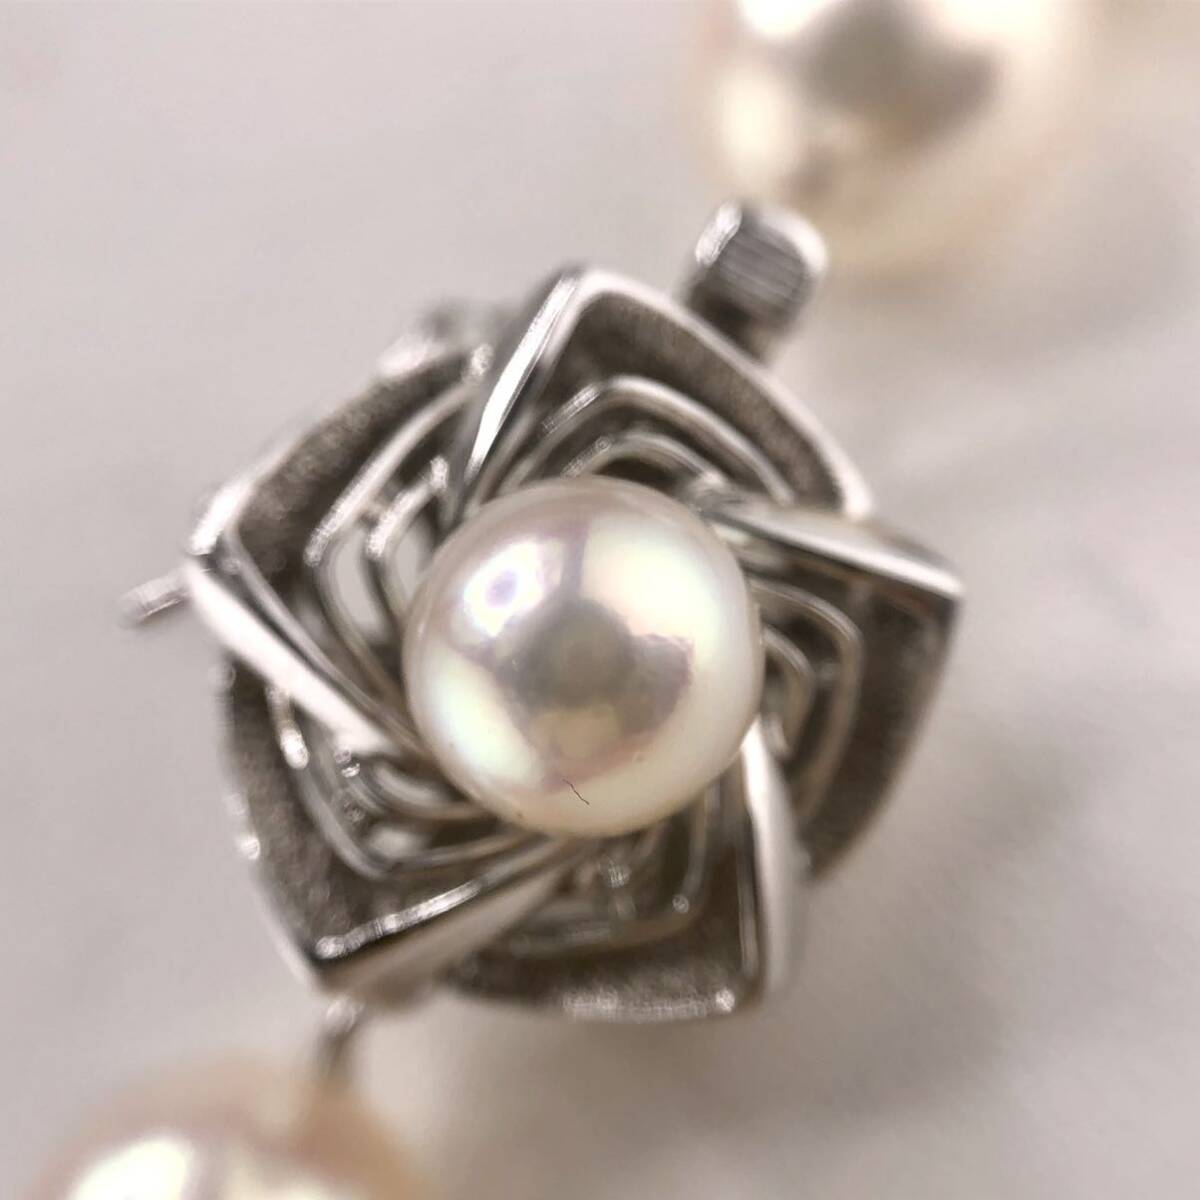 E03-9250 アコヤパールネックレス 8.5mm~9.0mm 41cm 46.8g ( アコヤ真珠 Pearl necklace SILVER )の画像3